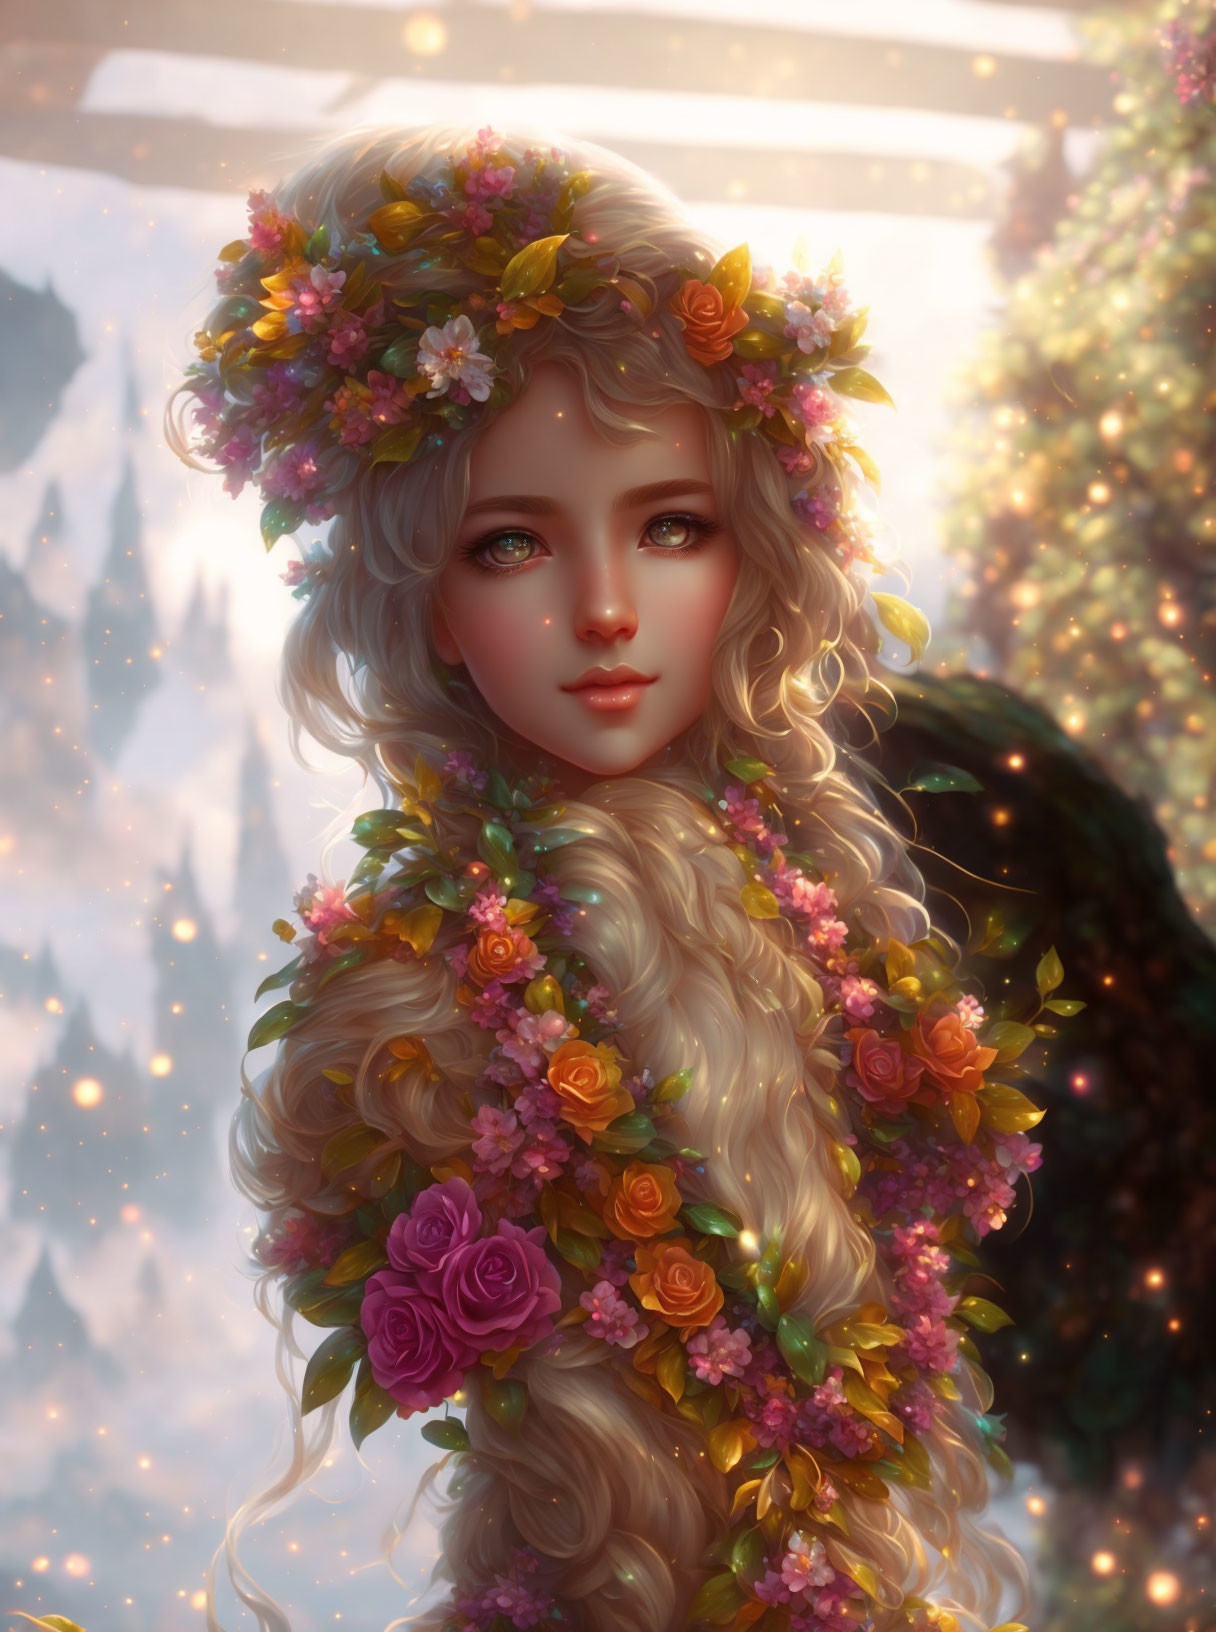 Woman with long blonde hair and floral crown in enchanting setting